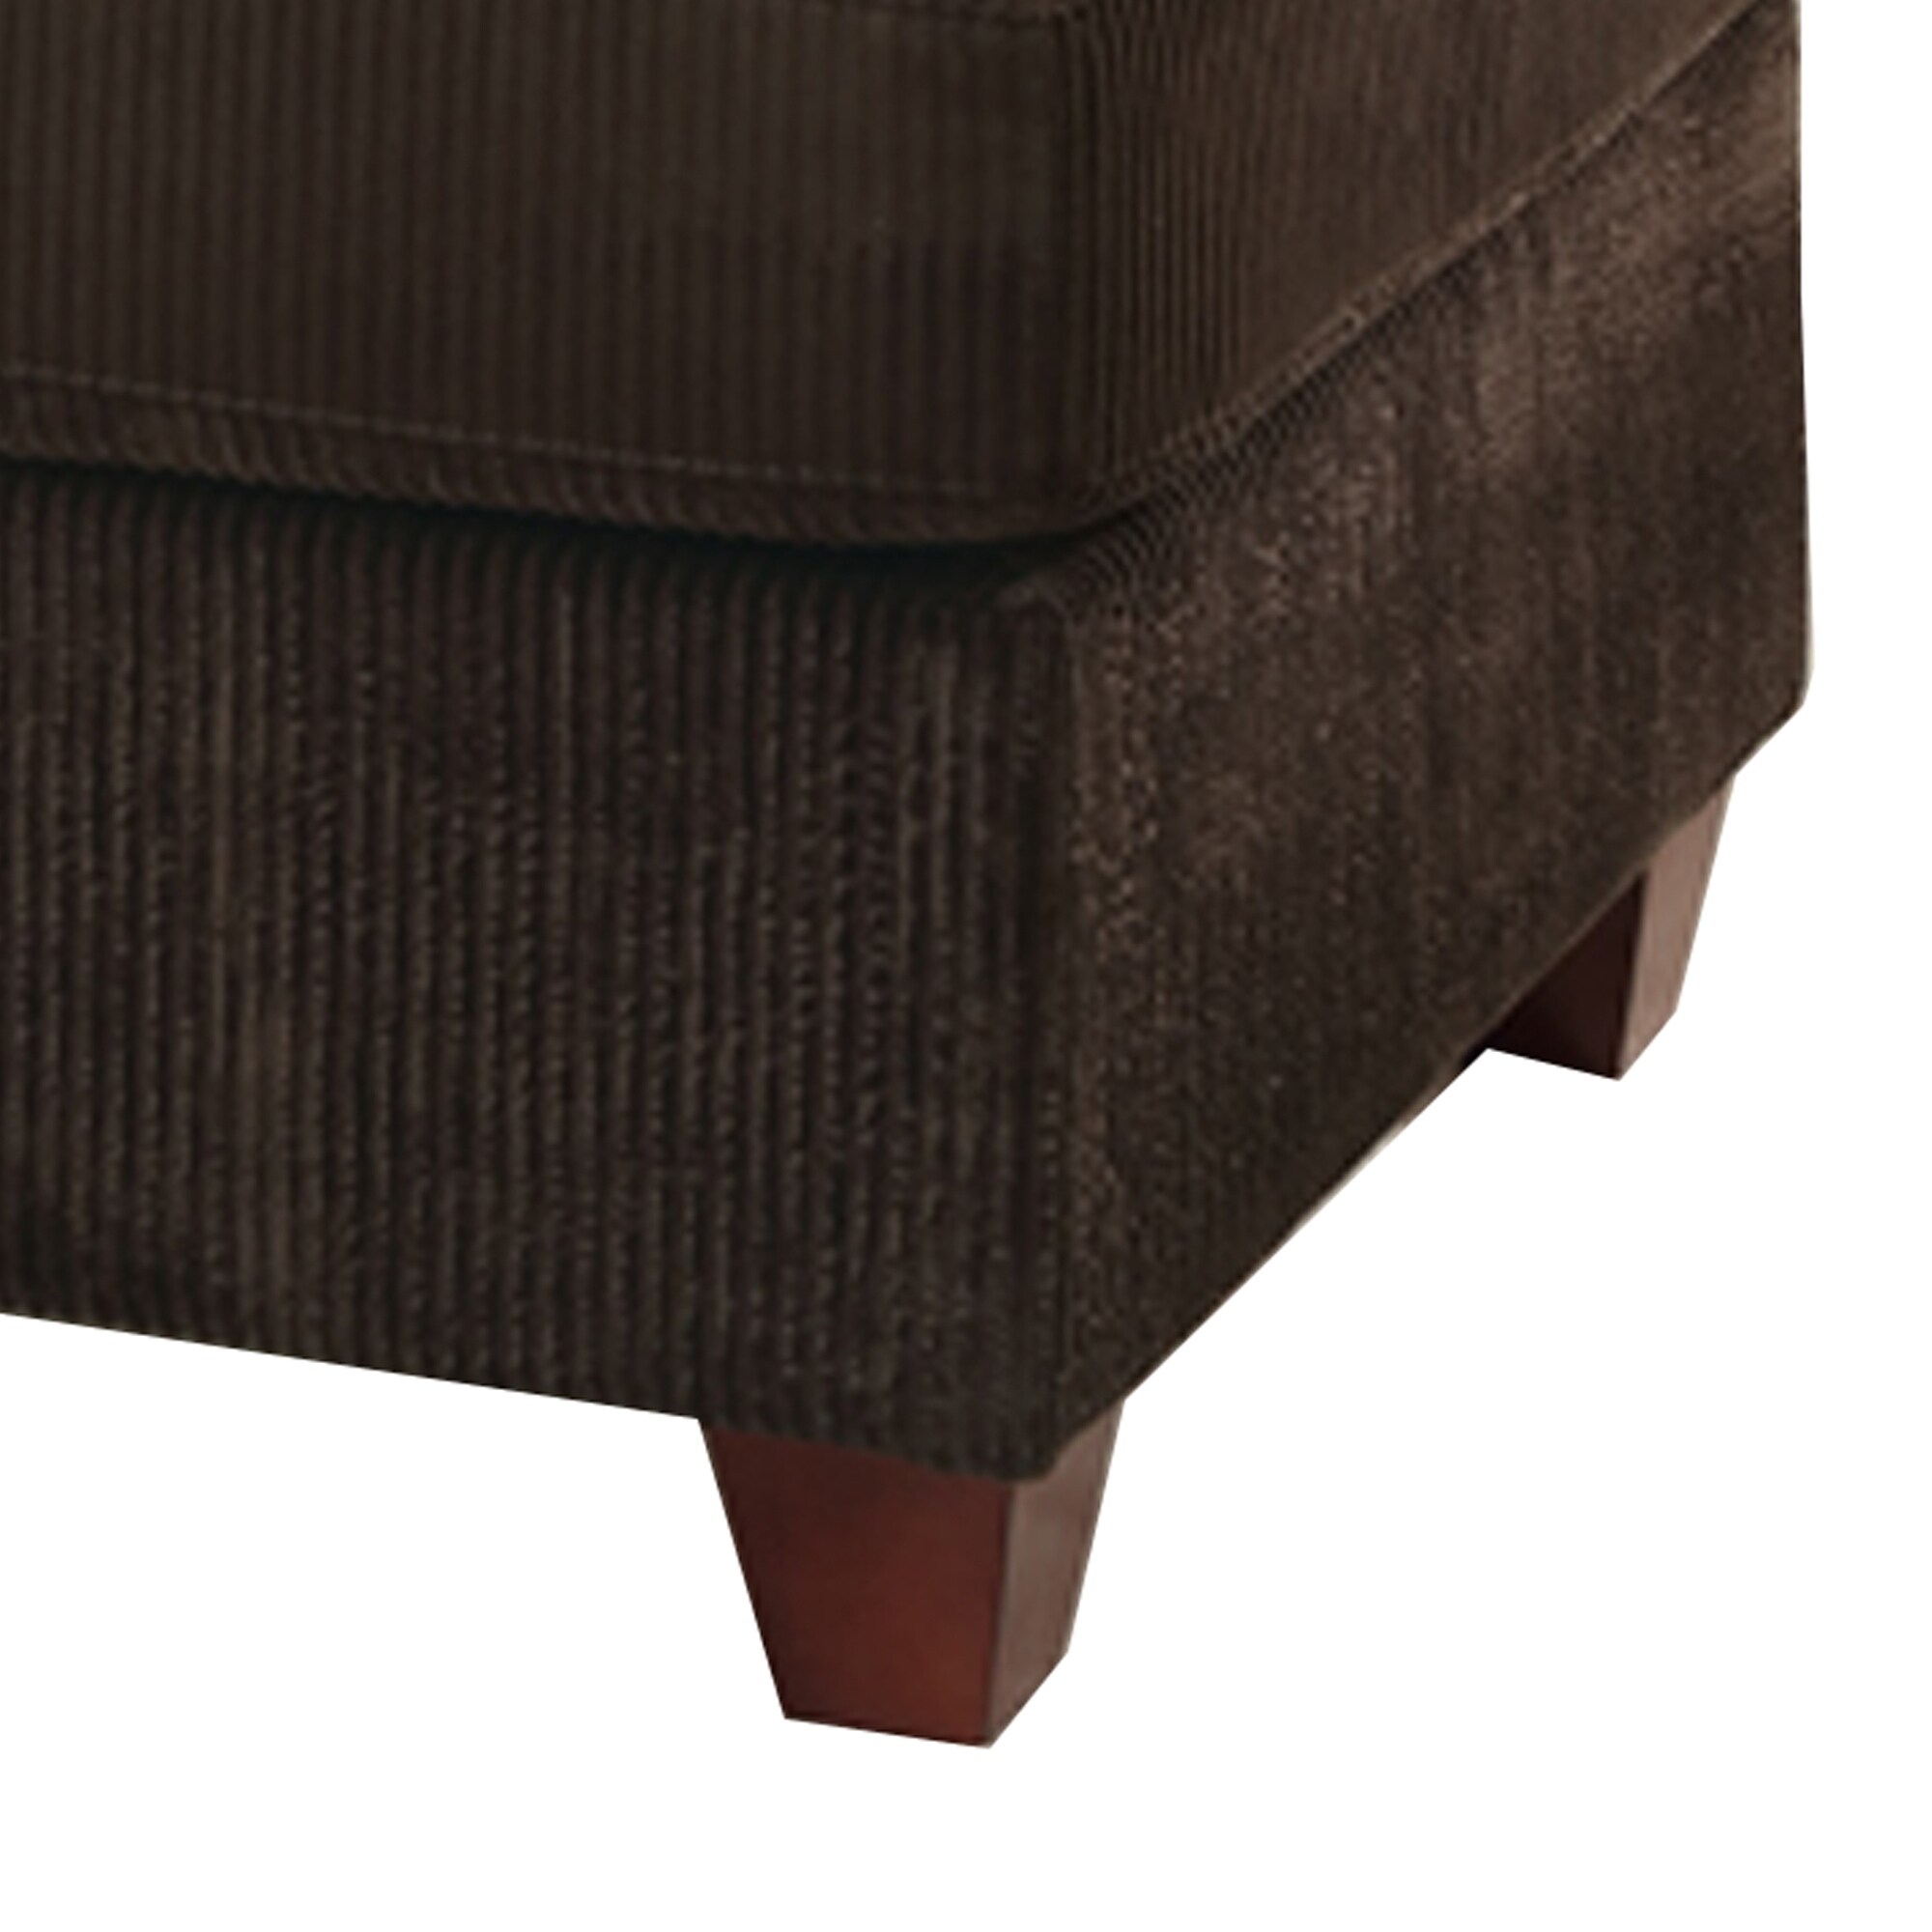 Shop Cocktail Ottoman In Chocolate Brown Corduroy Design Fabric